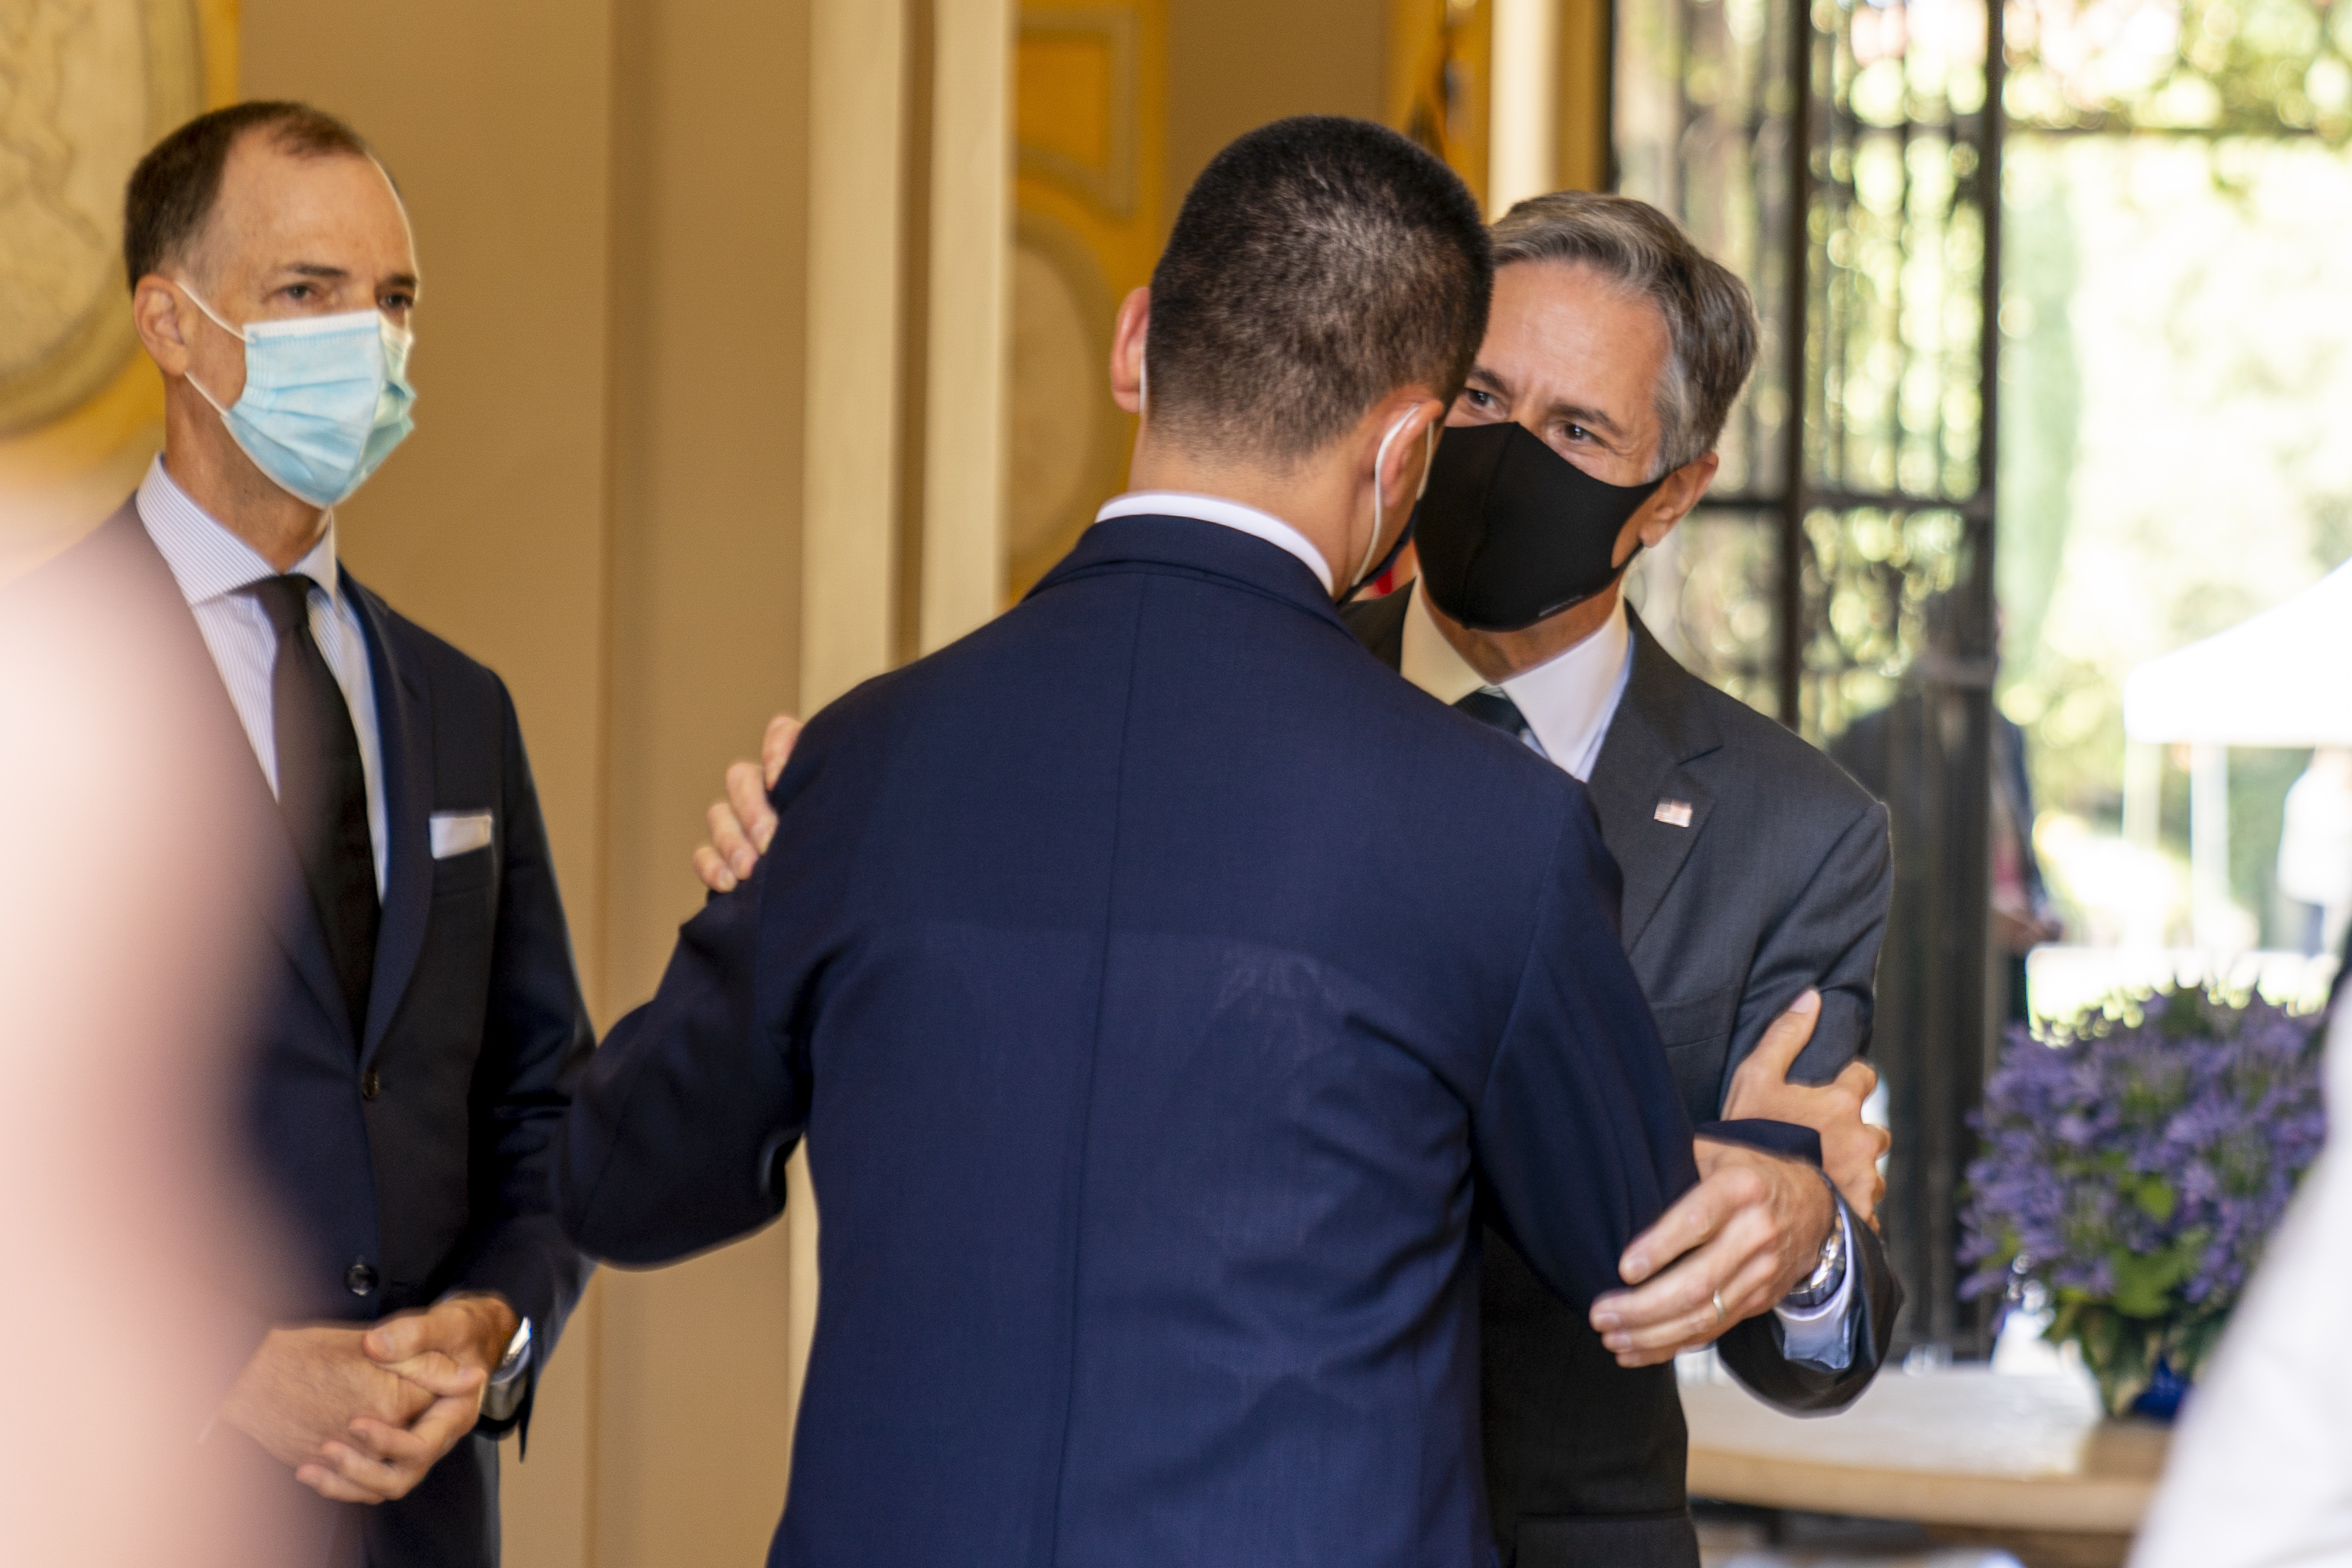 Secretary of State Antony Blinken meets with Italy's Foreign Minister Luigi Di Maio, center left, at Villa Taverna, The U.S. Ambassador's Residence in Rome, Sunday, June 27, 2021. Blinken is on a week long trip in Europe traveling to Germany, France and Italy. Also pictured is Chargé d'Affaires ad interim Thomas Smitham, left. (AP Photo/Andrew Harnik, Pool)